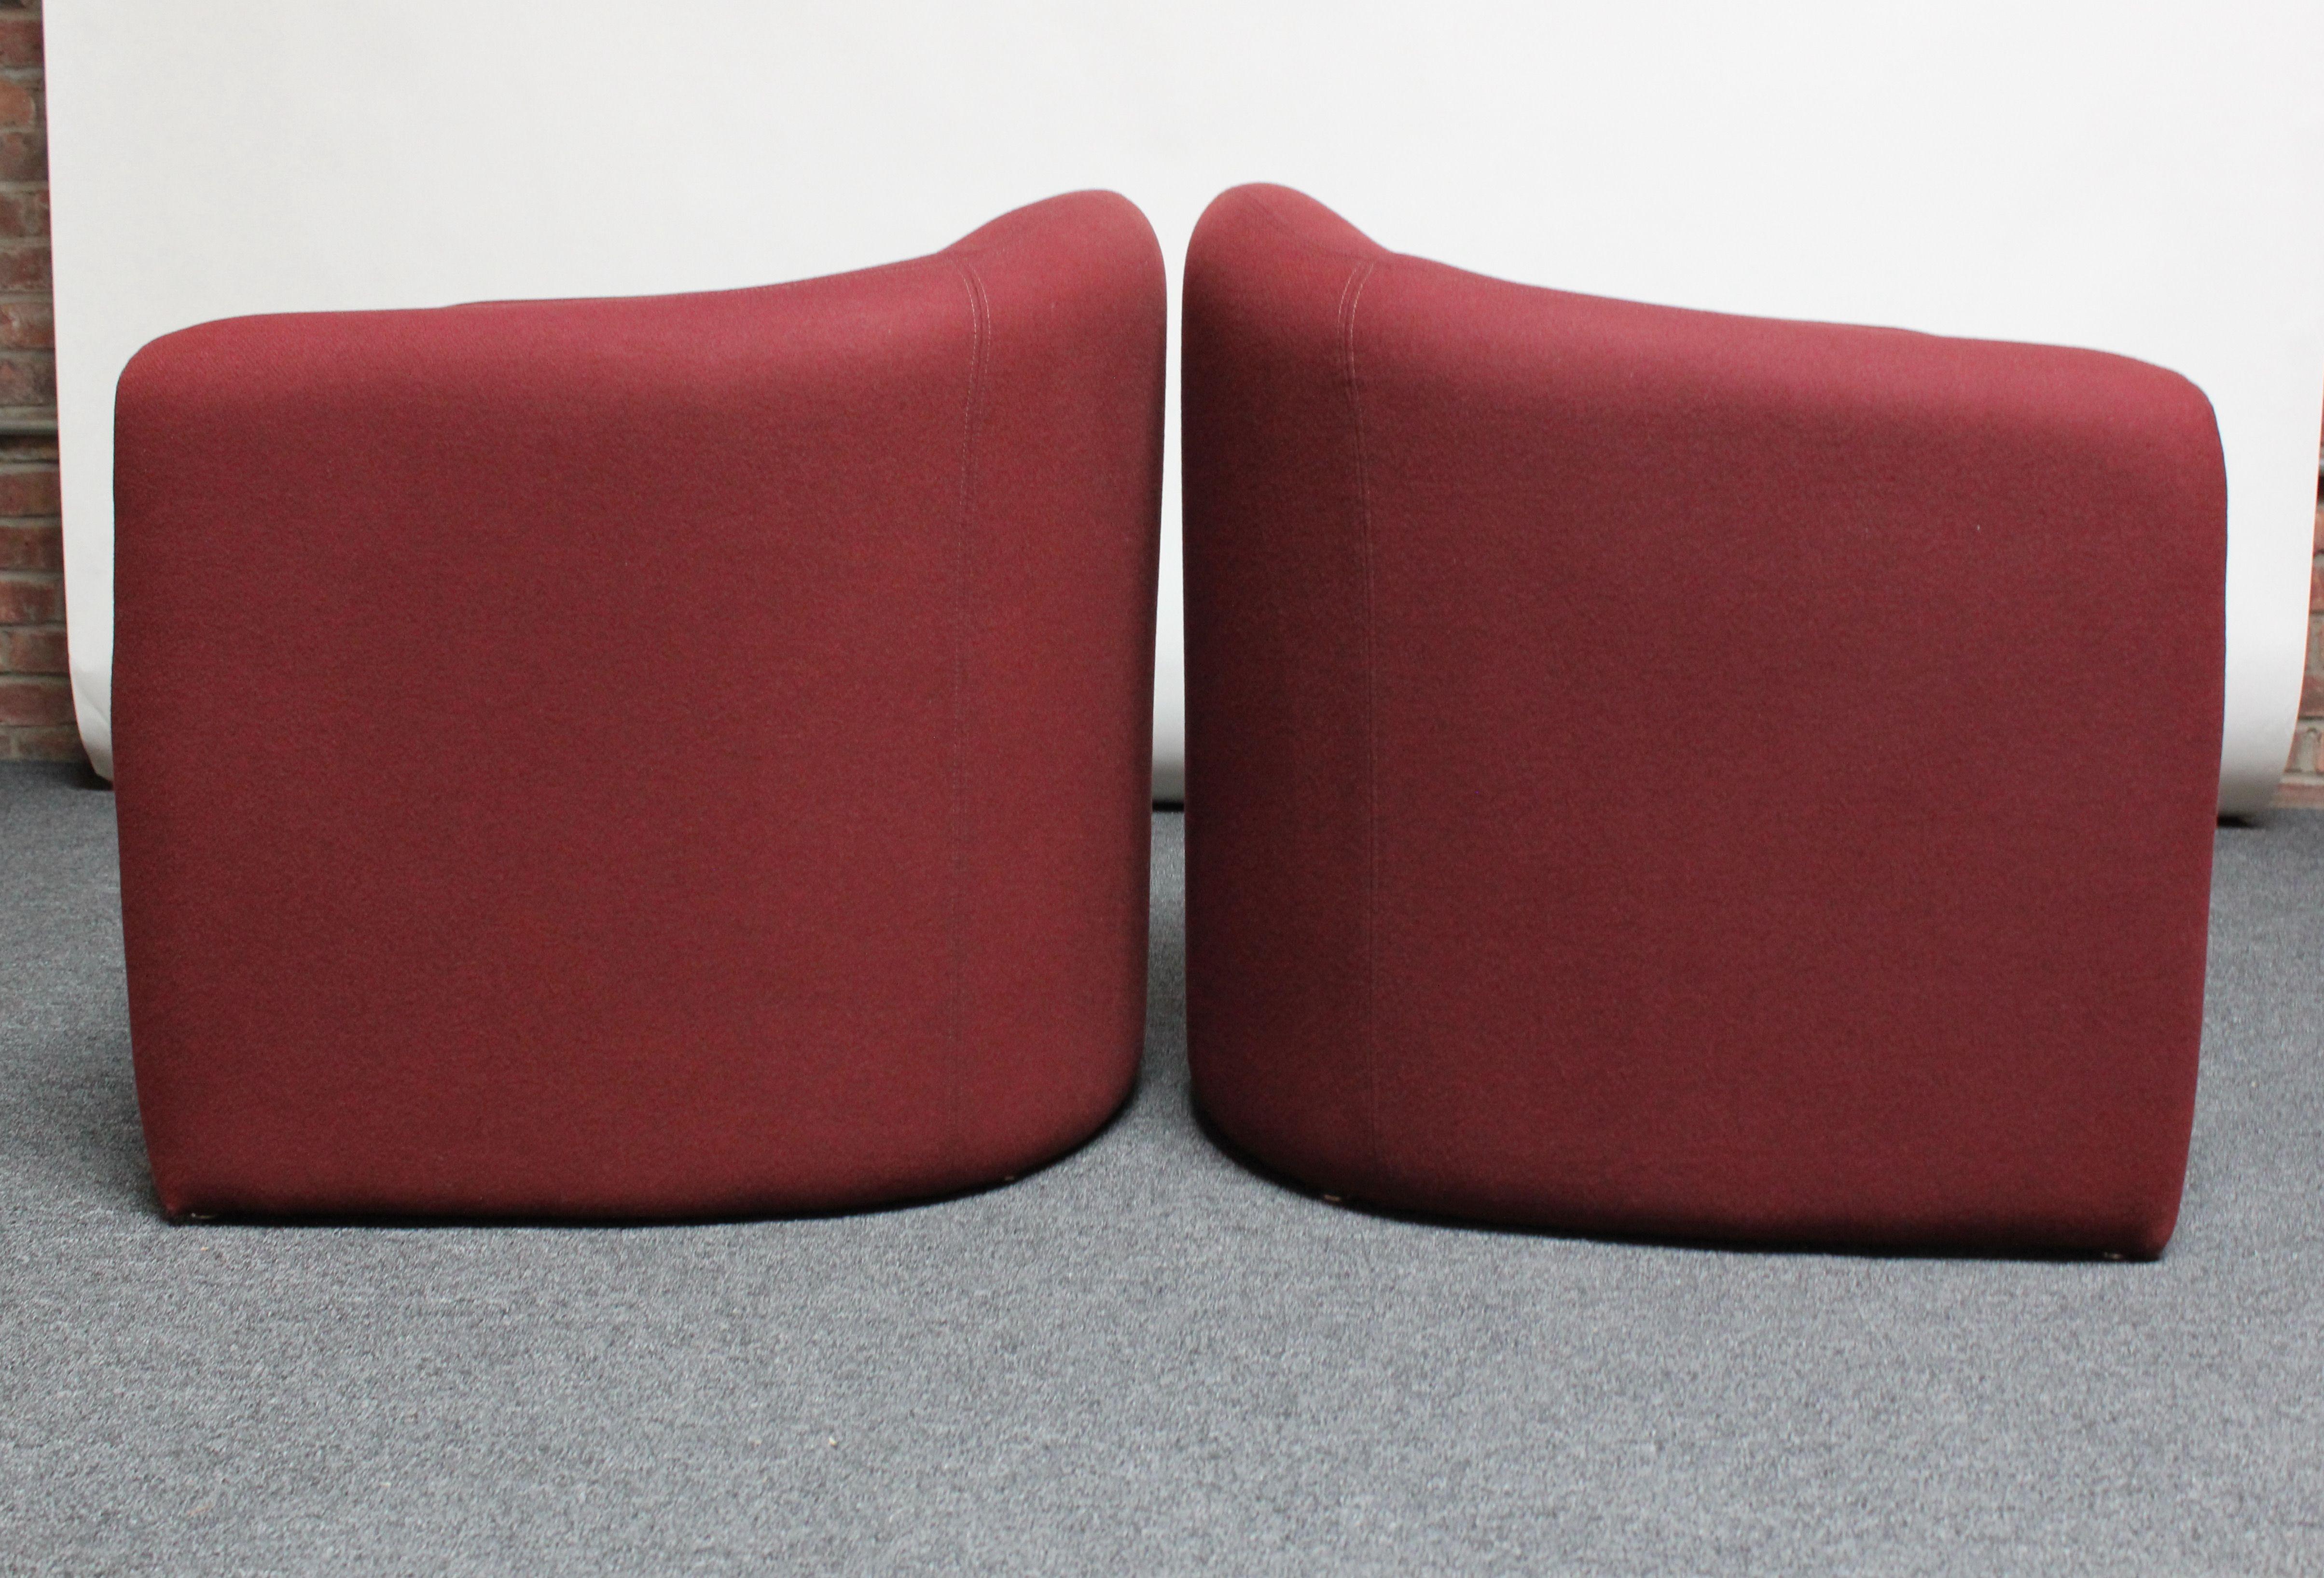 Pair of Vintage Biomorphic Lounge Chairs by Vladimir Kagan for Preview 1